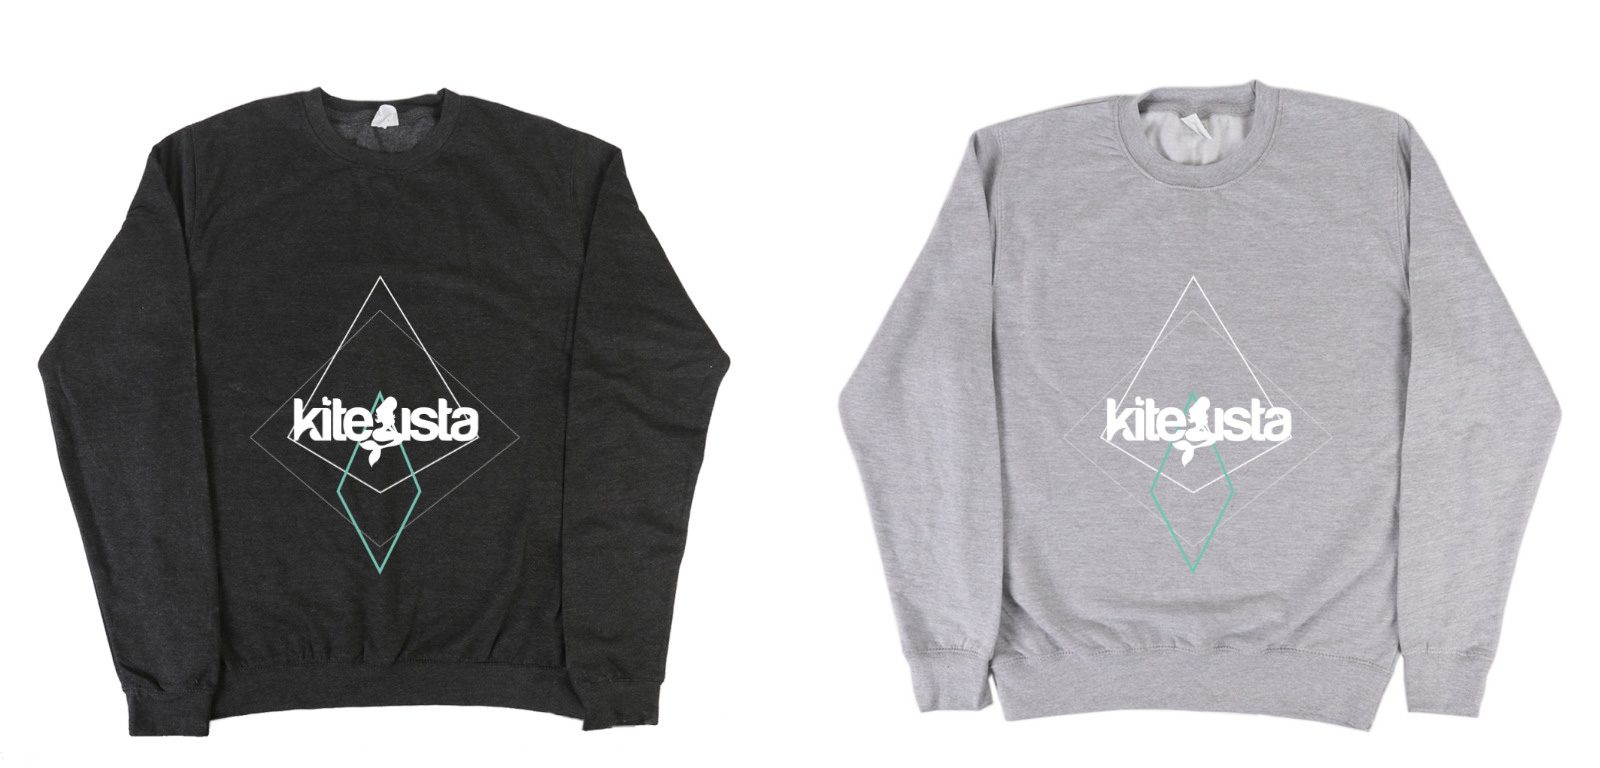 KiteSista Limited Edition Series 01 – Only Available for 14 Days